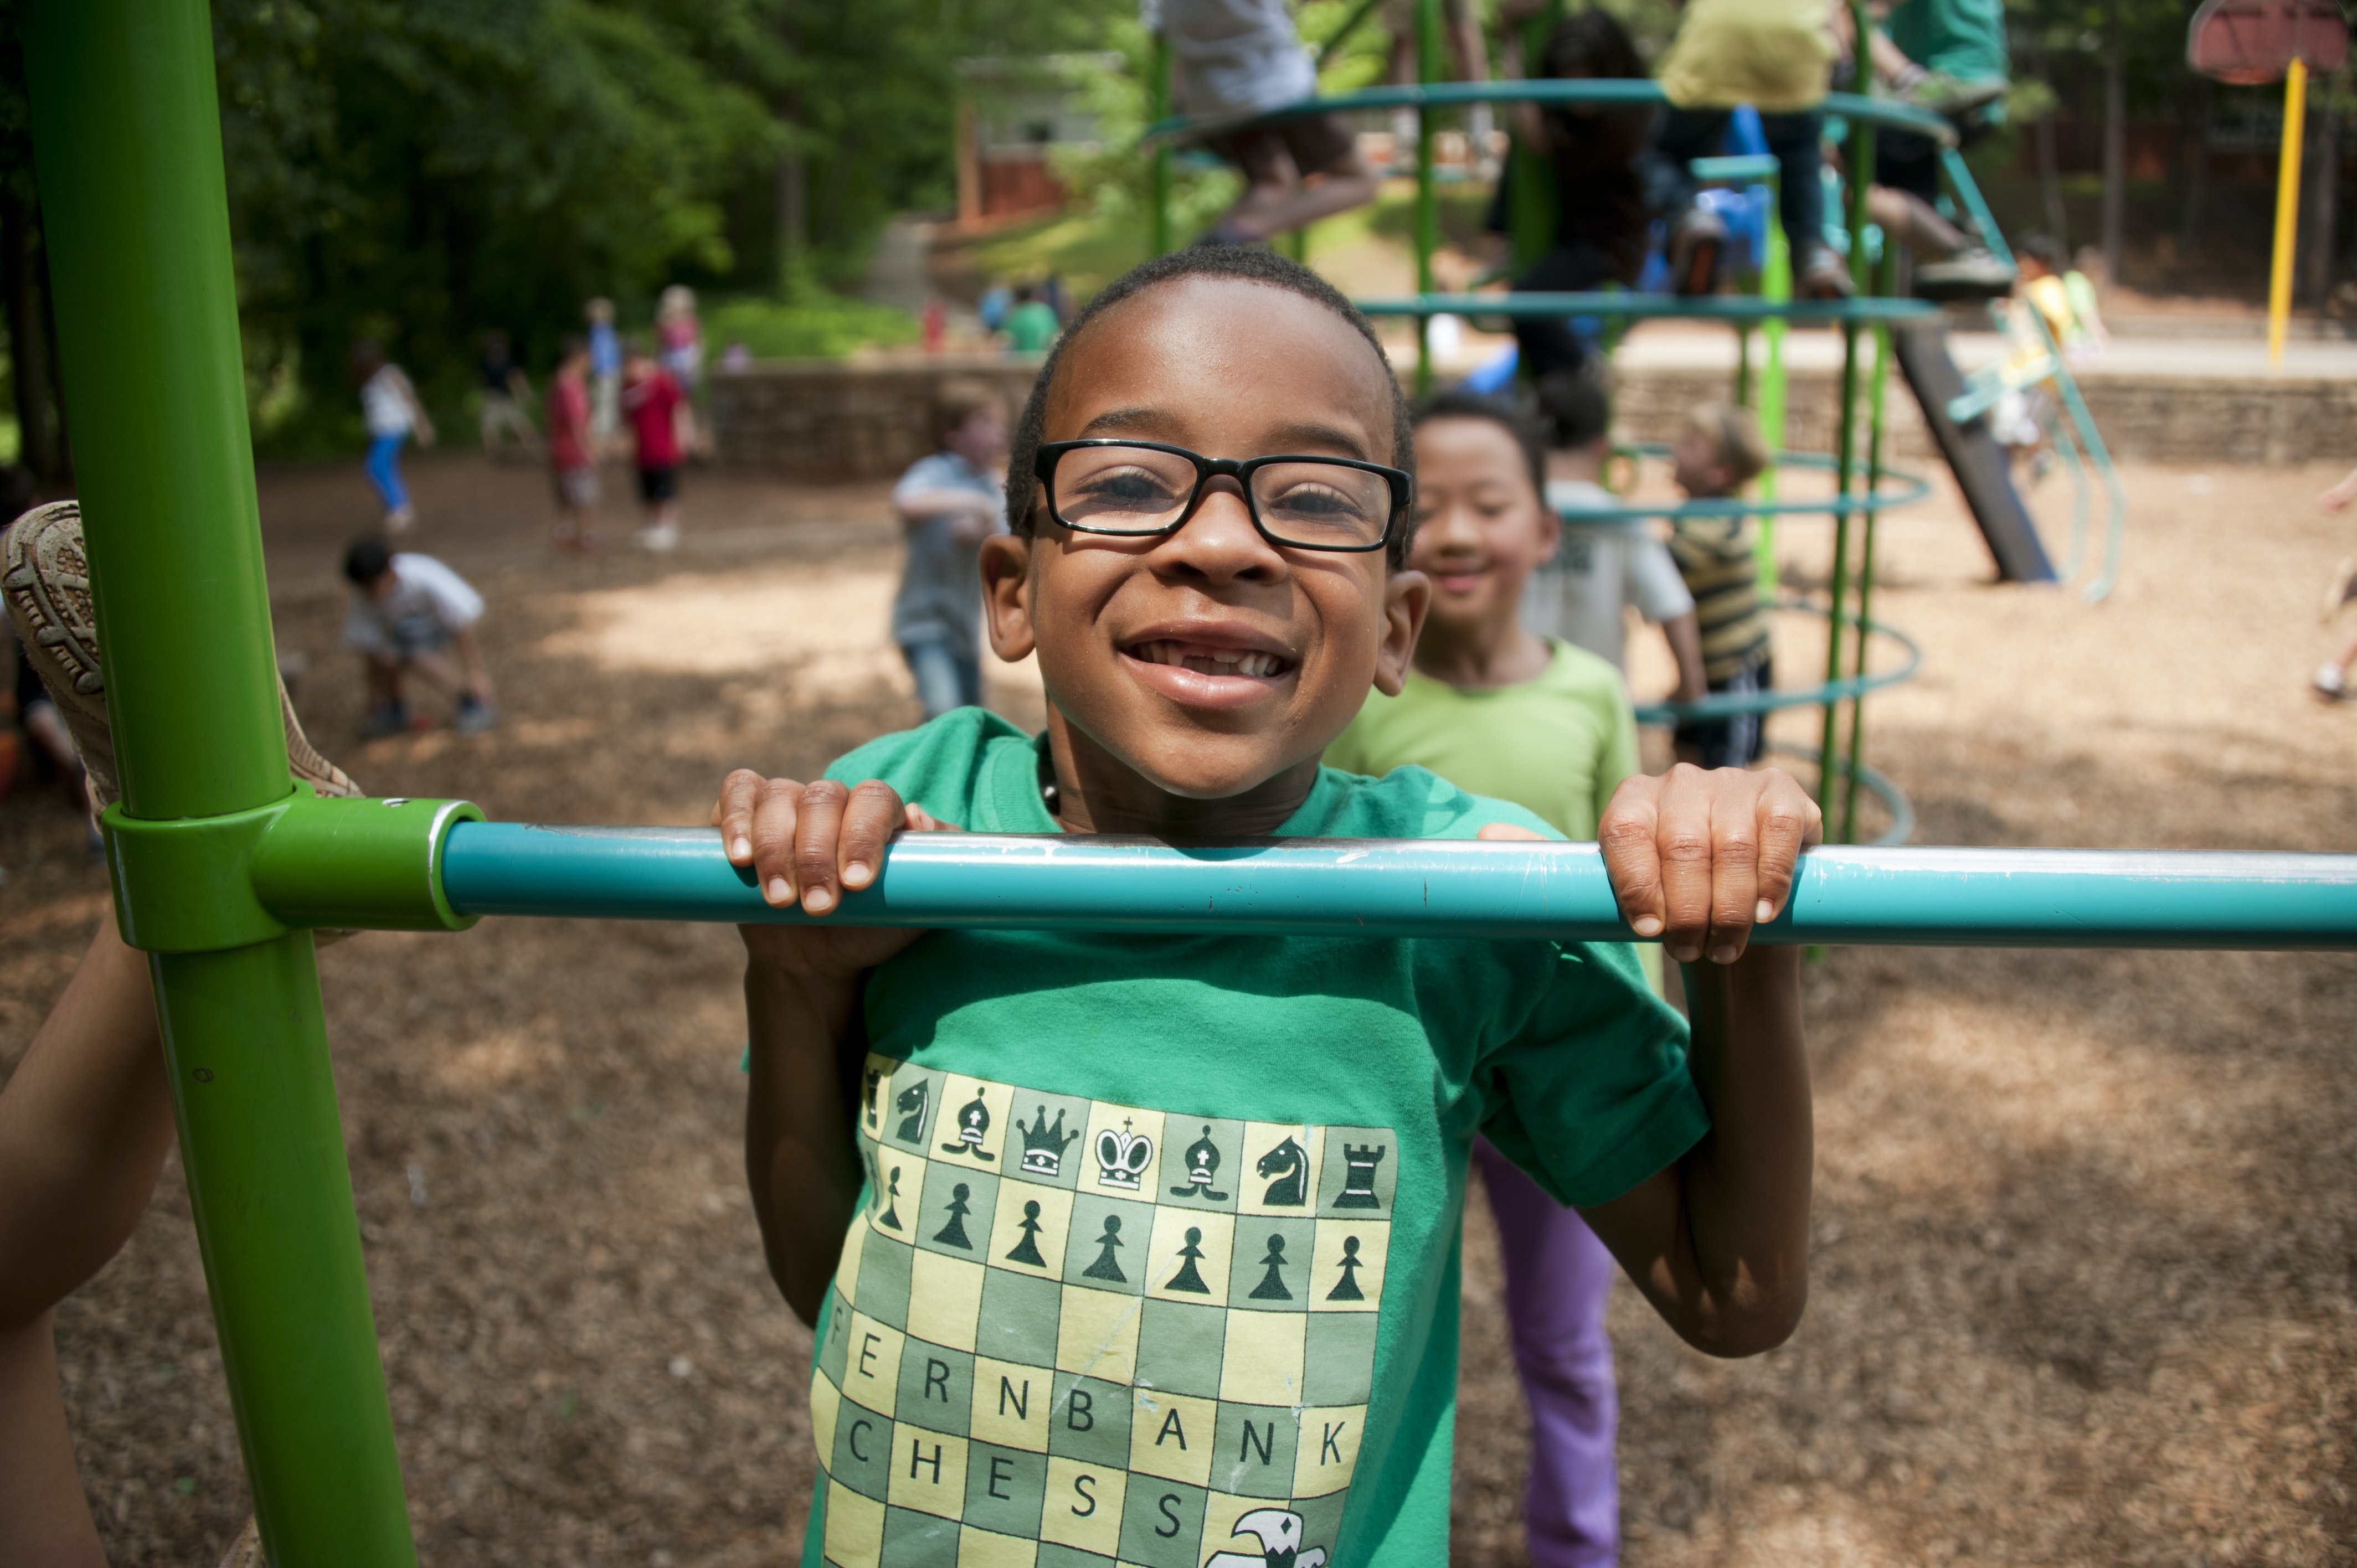 A young Black boy wearing glasses and a green shirt smiles a big toothy grin as he pulls himself up a bar in a playground.